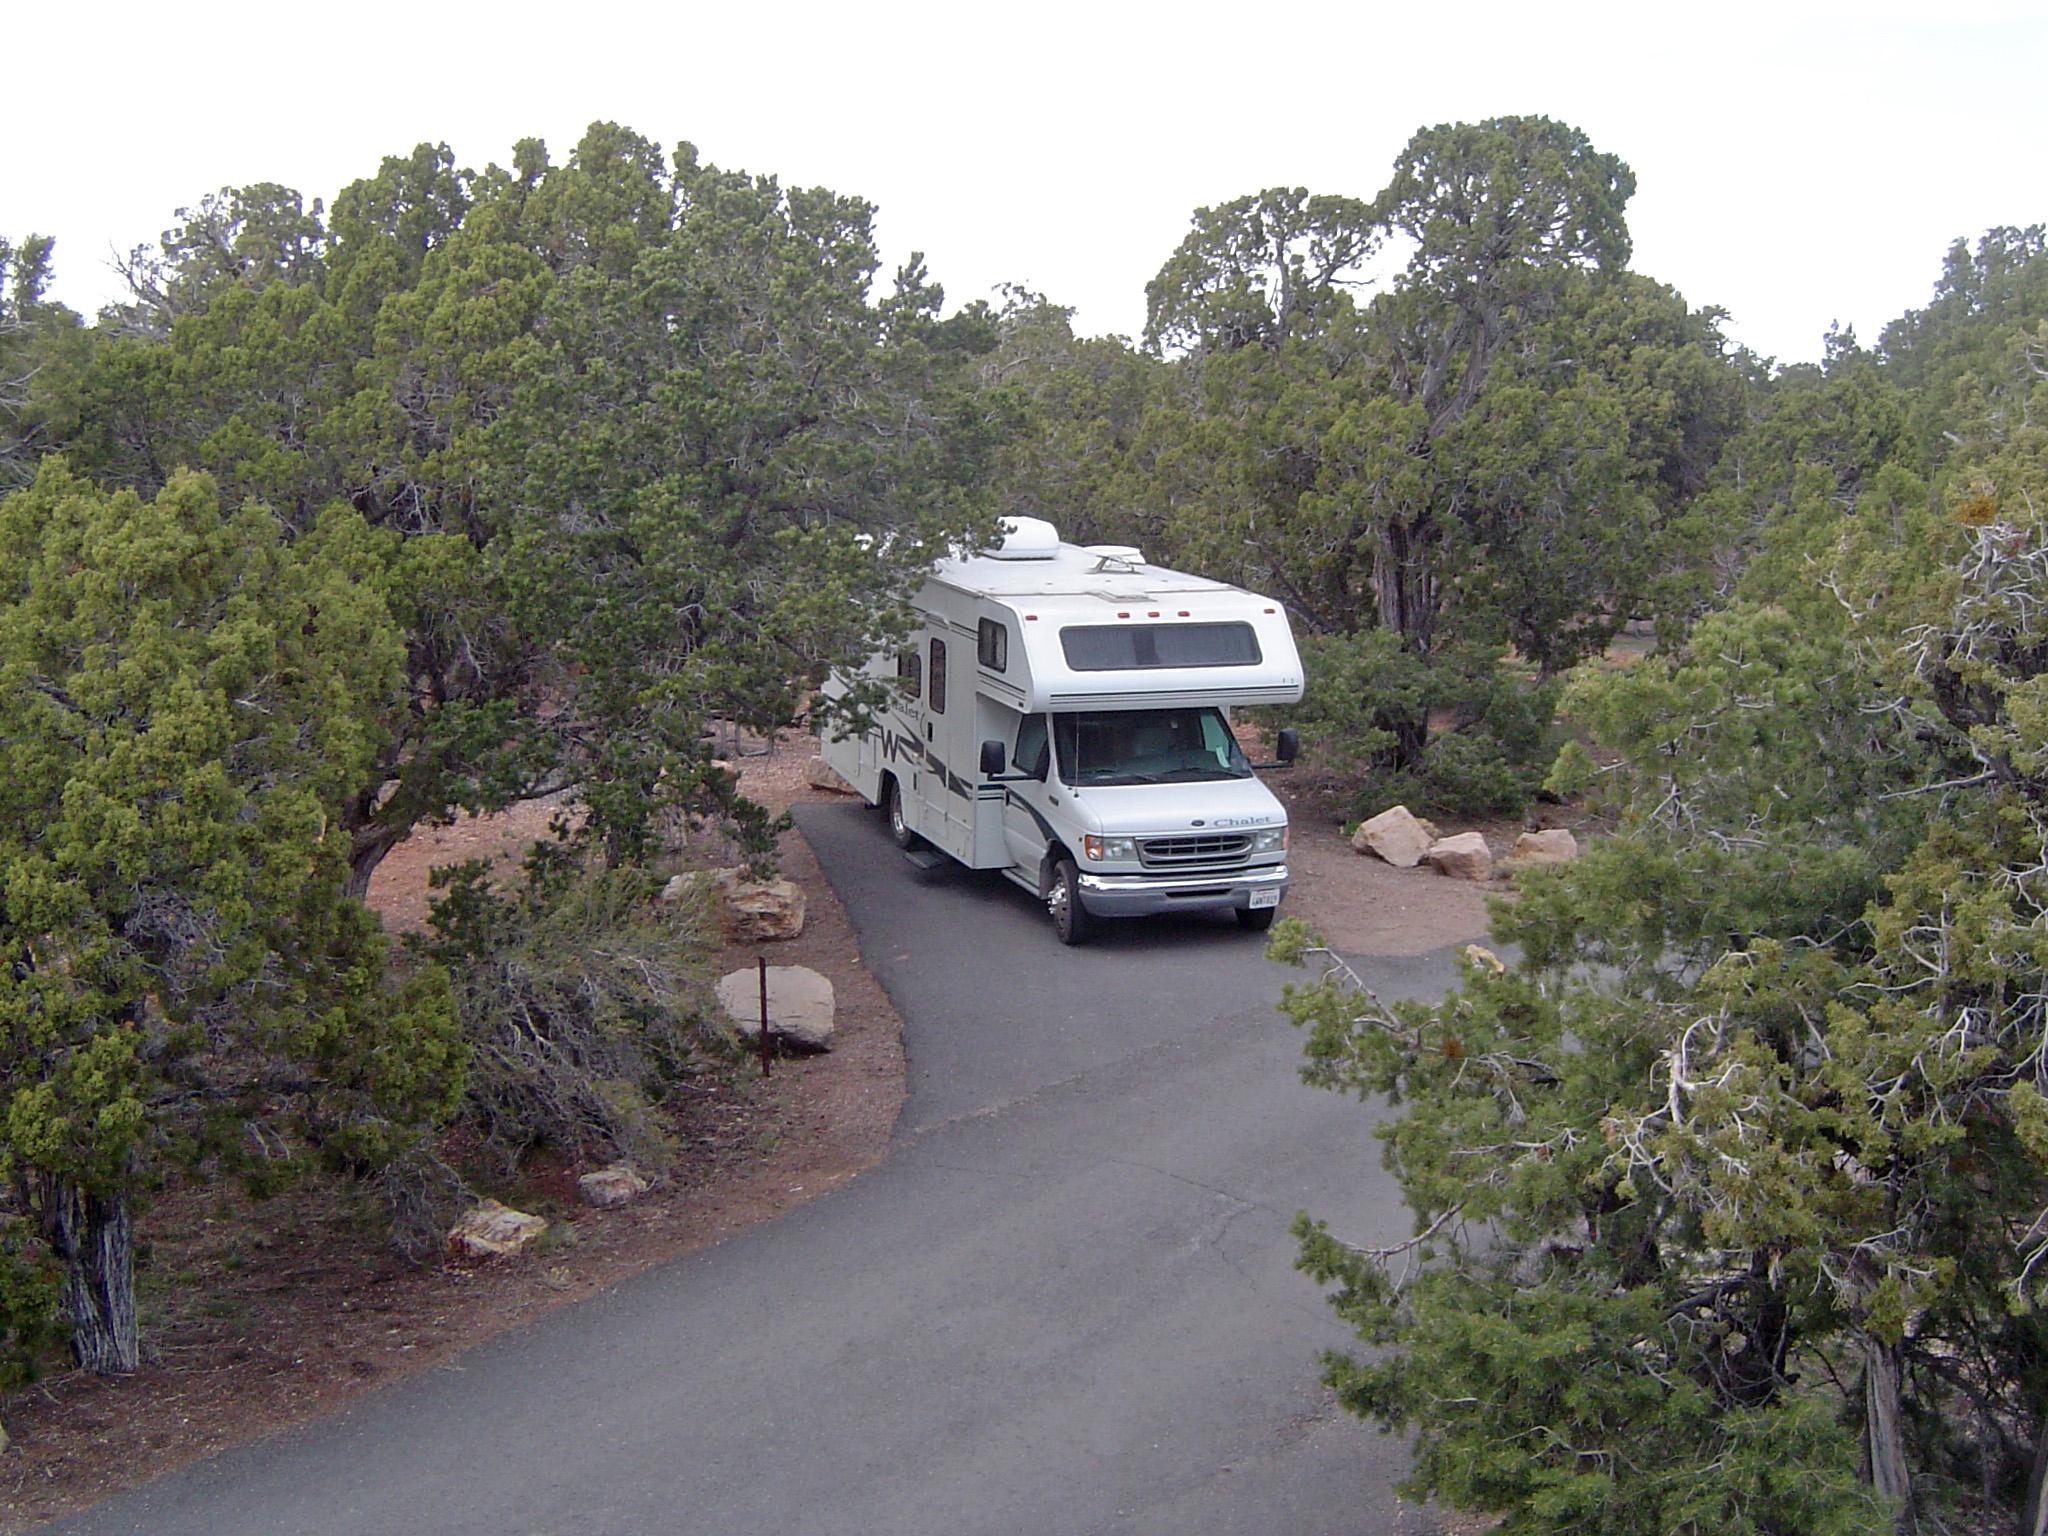 An RV parked on a paved surface, nestled in a desert scrub forest.